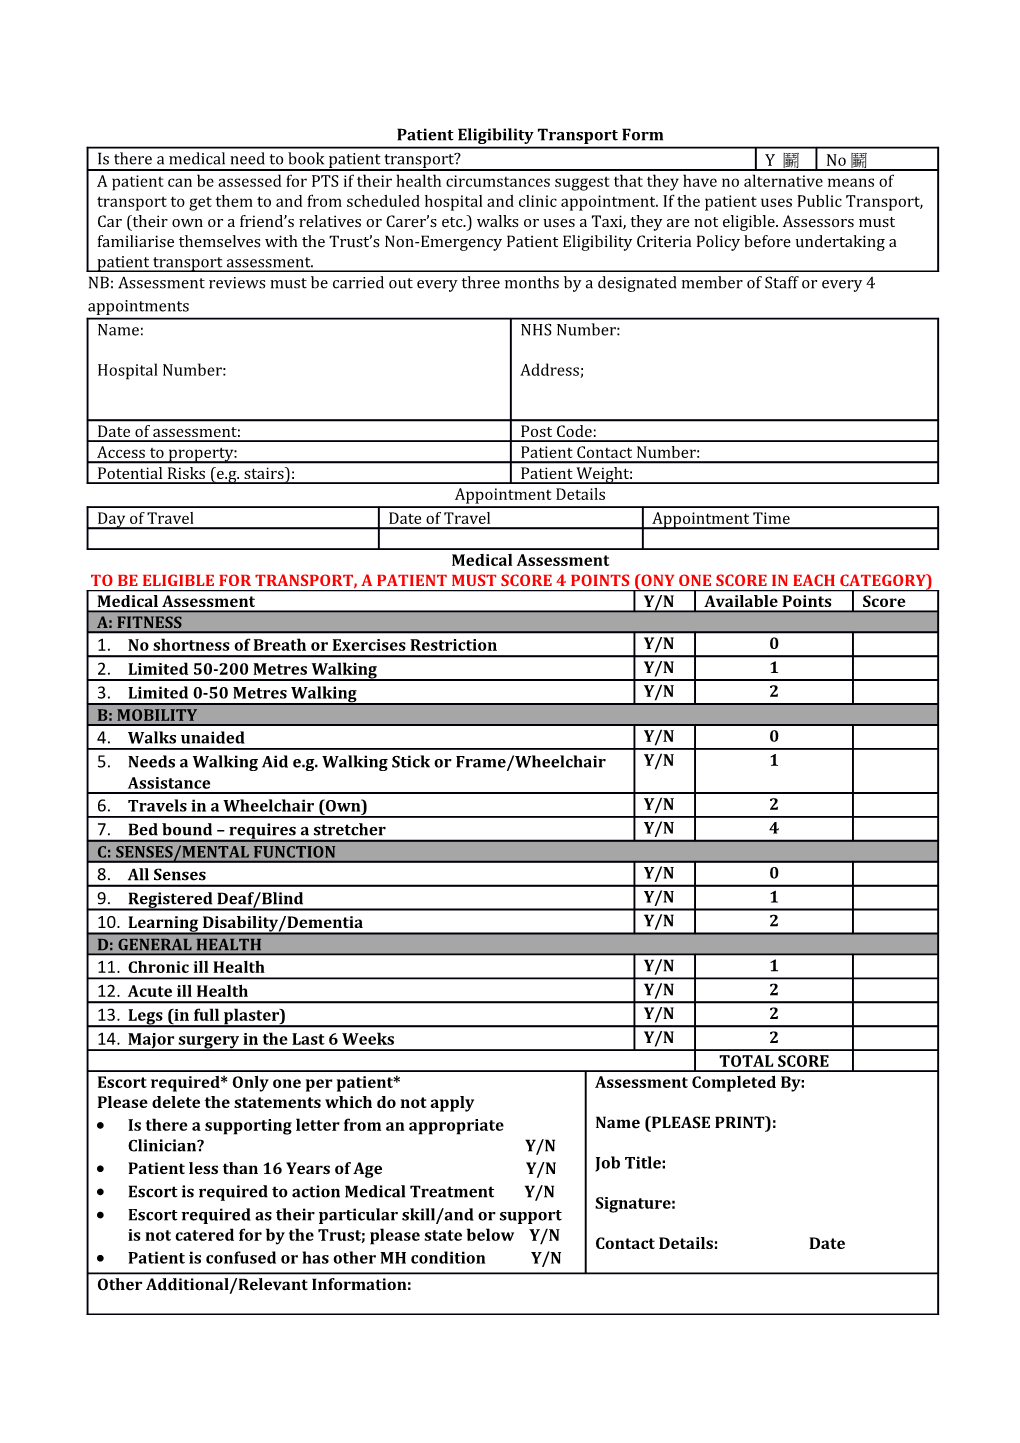 Patient Eligibility Transport Form - to Be Uploaded on to the Patients Clinical System Record